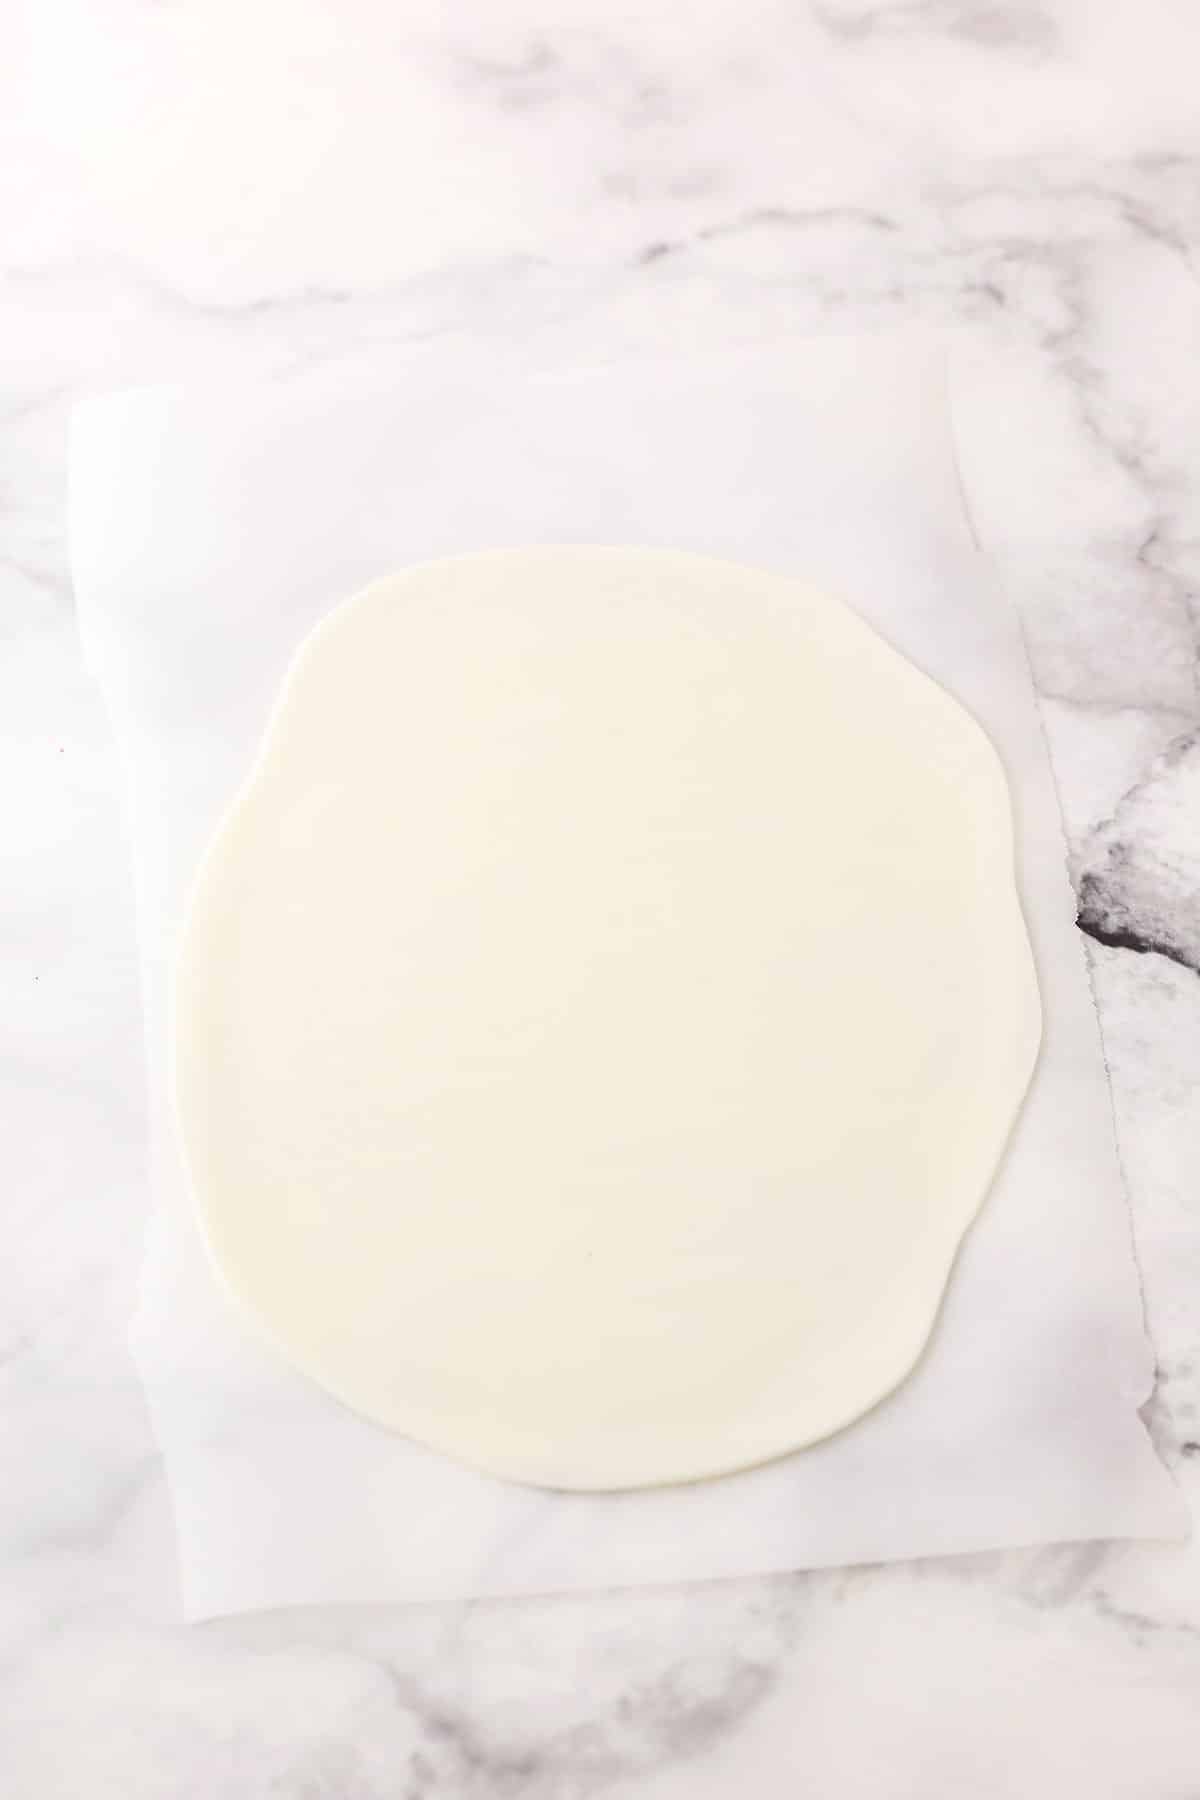 Step 1 of making fondant bunny ears showing rolling out white fondant flat on a table top